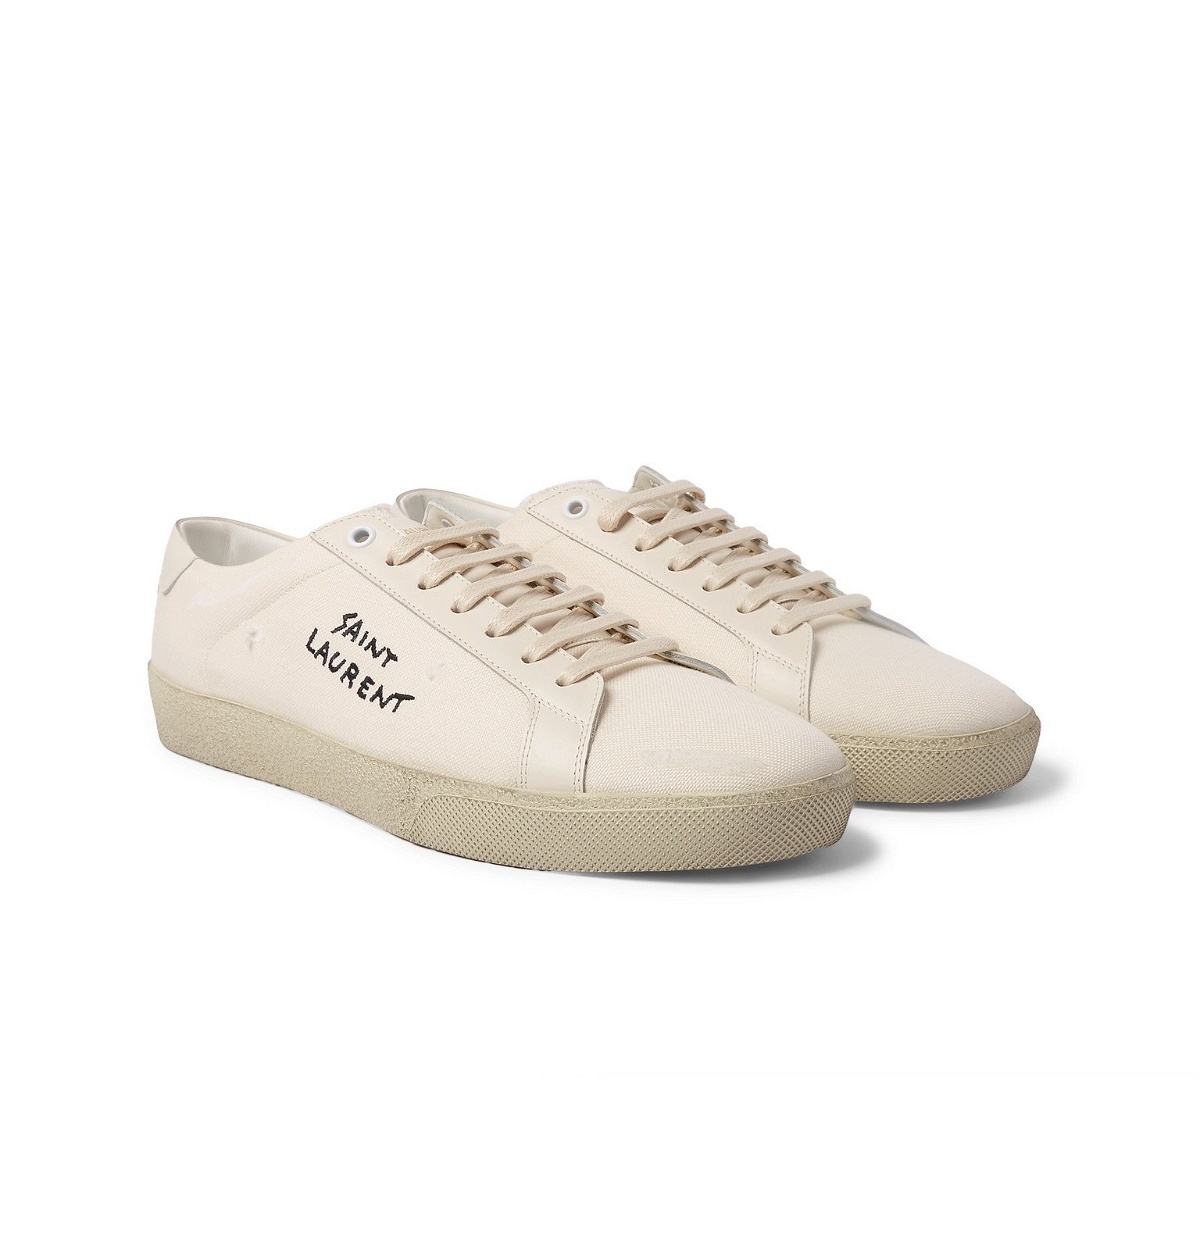 LAURENT - SL/06 Court Classic Leather-Trimmed Logo-Embroidered Distressed Canvas Sneakers - Neutrals Saint Laurent